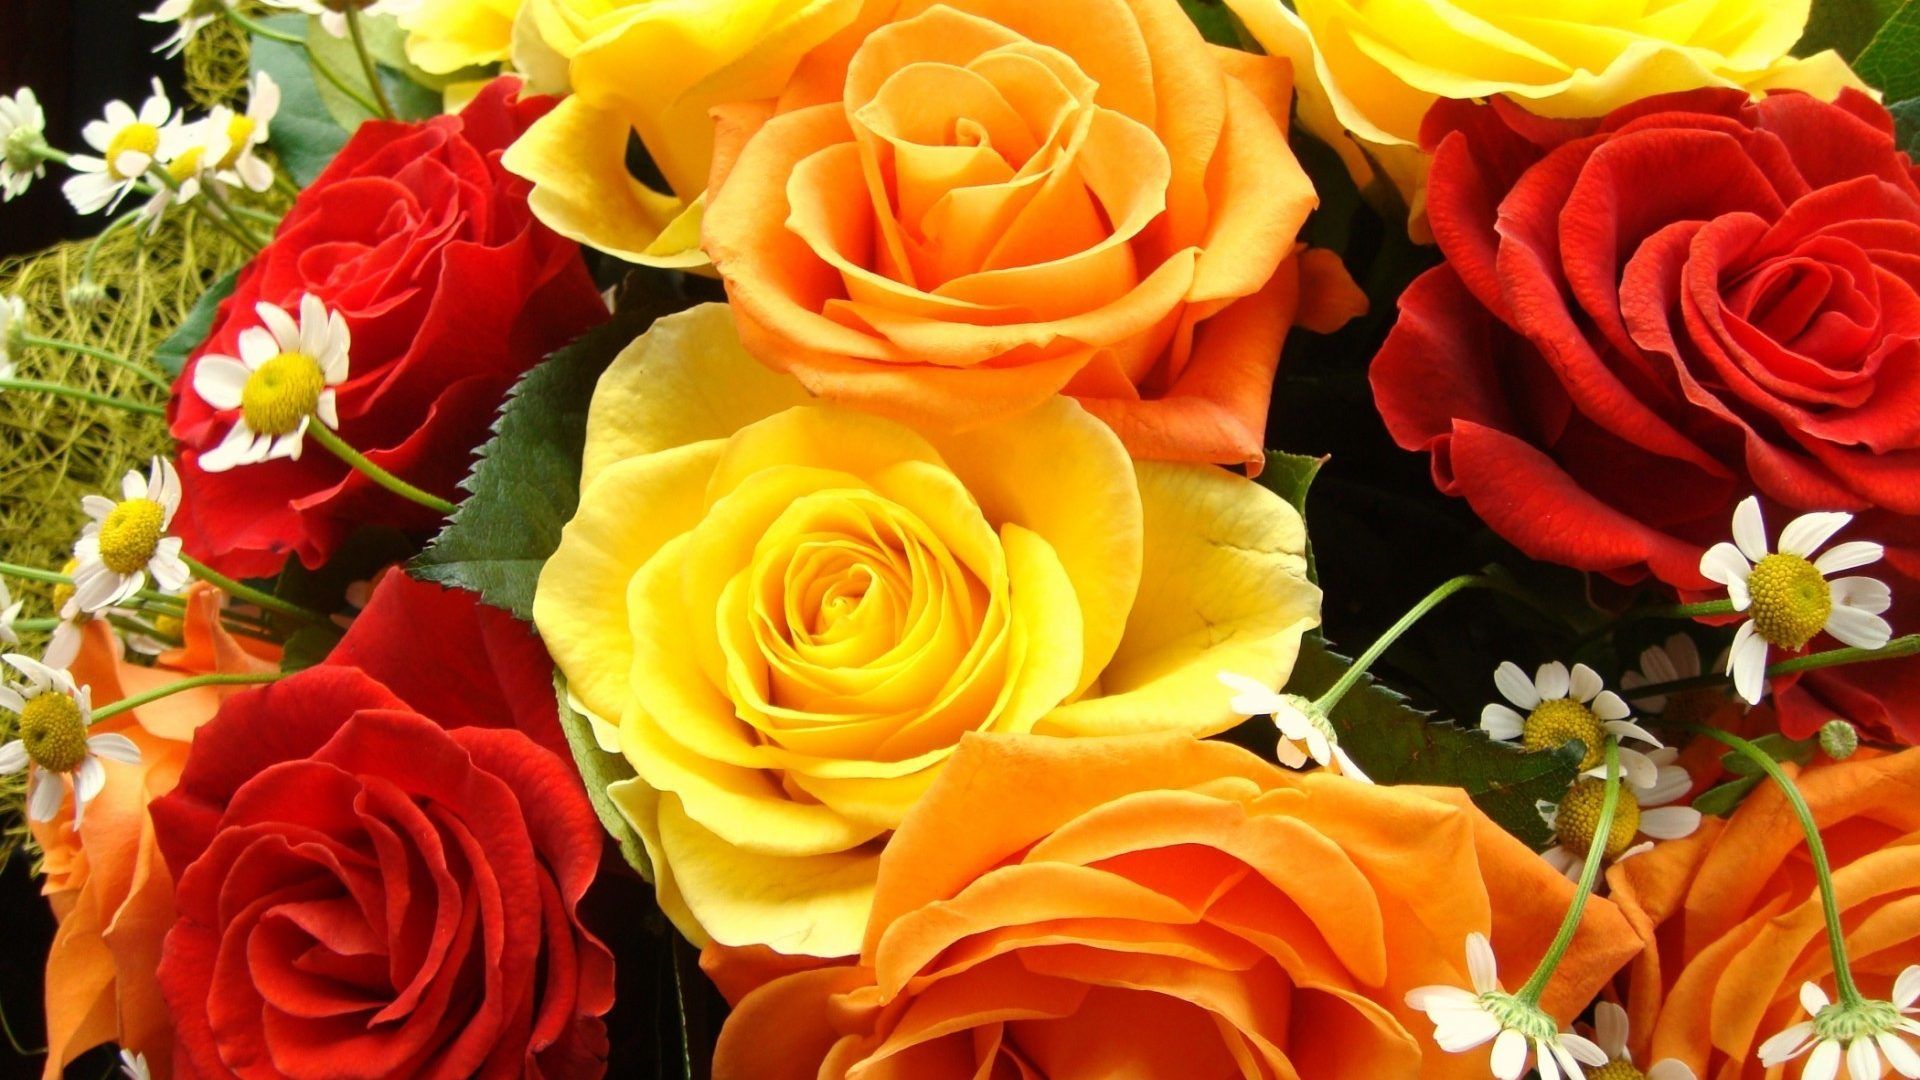 Colorful Rose Bouquet Widescreen Wallpaper And Red Rose